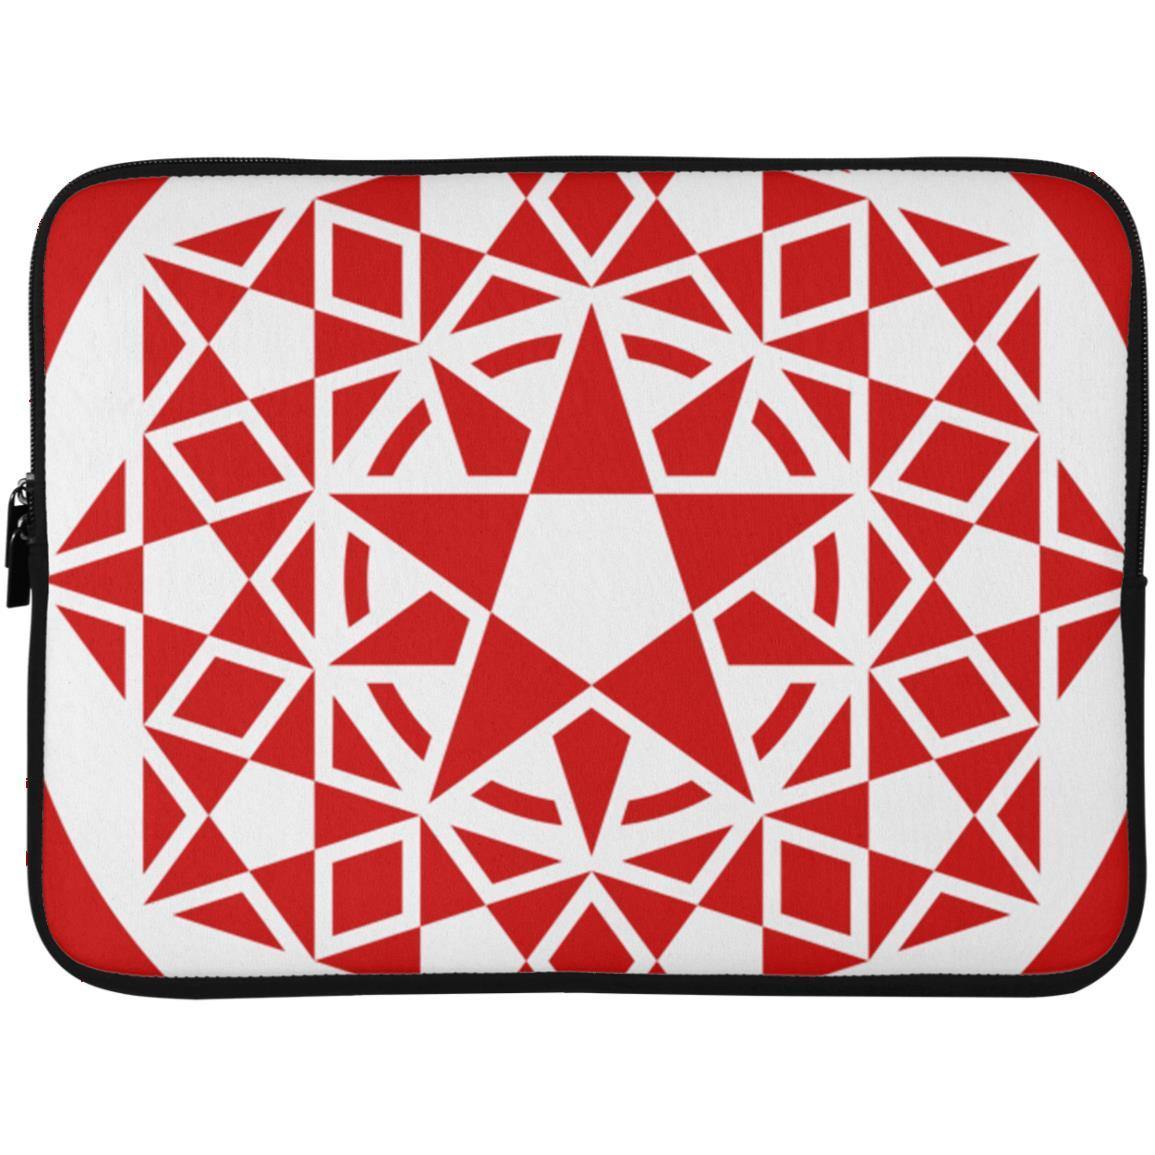 Crop Circle Laptop Sleeve - Hackpen Hill - Shapes of Wisdom